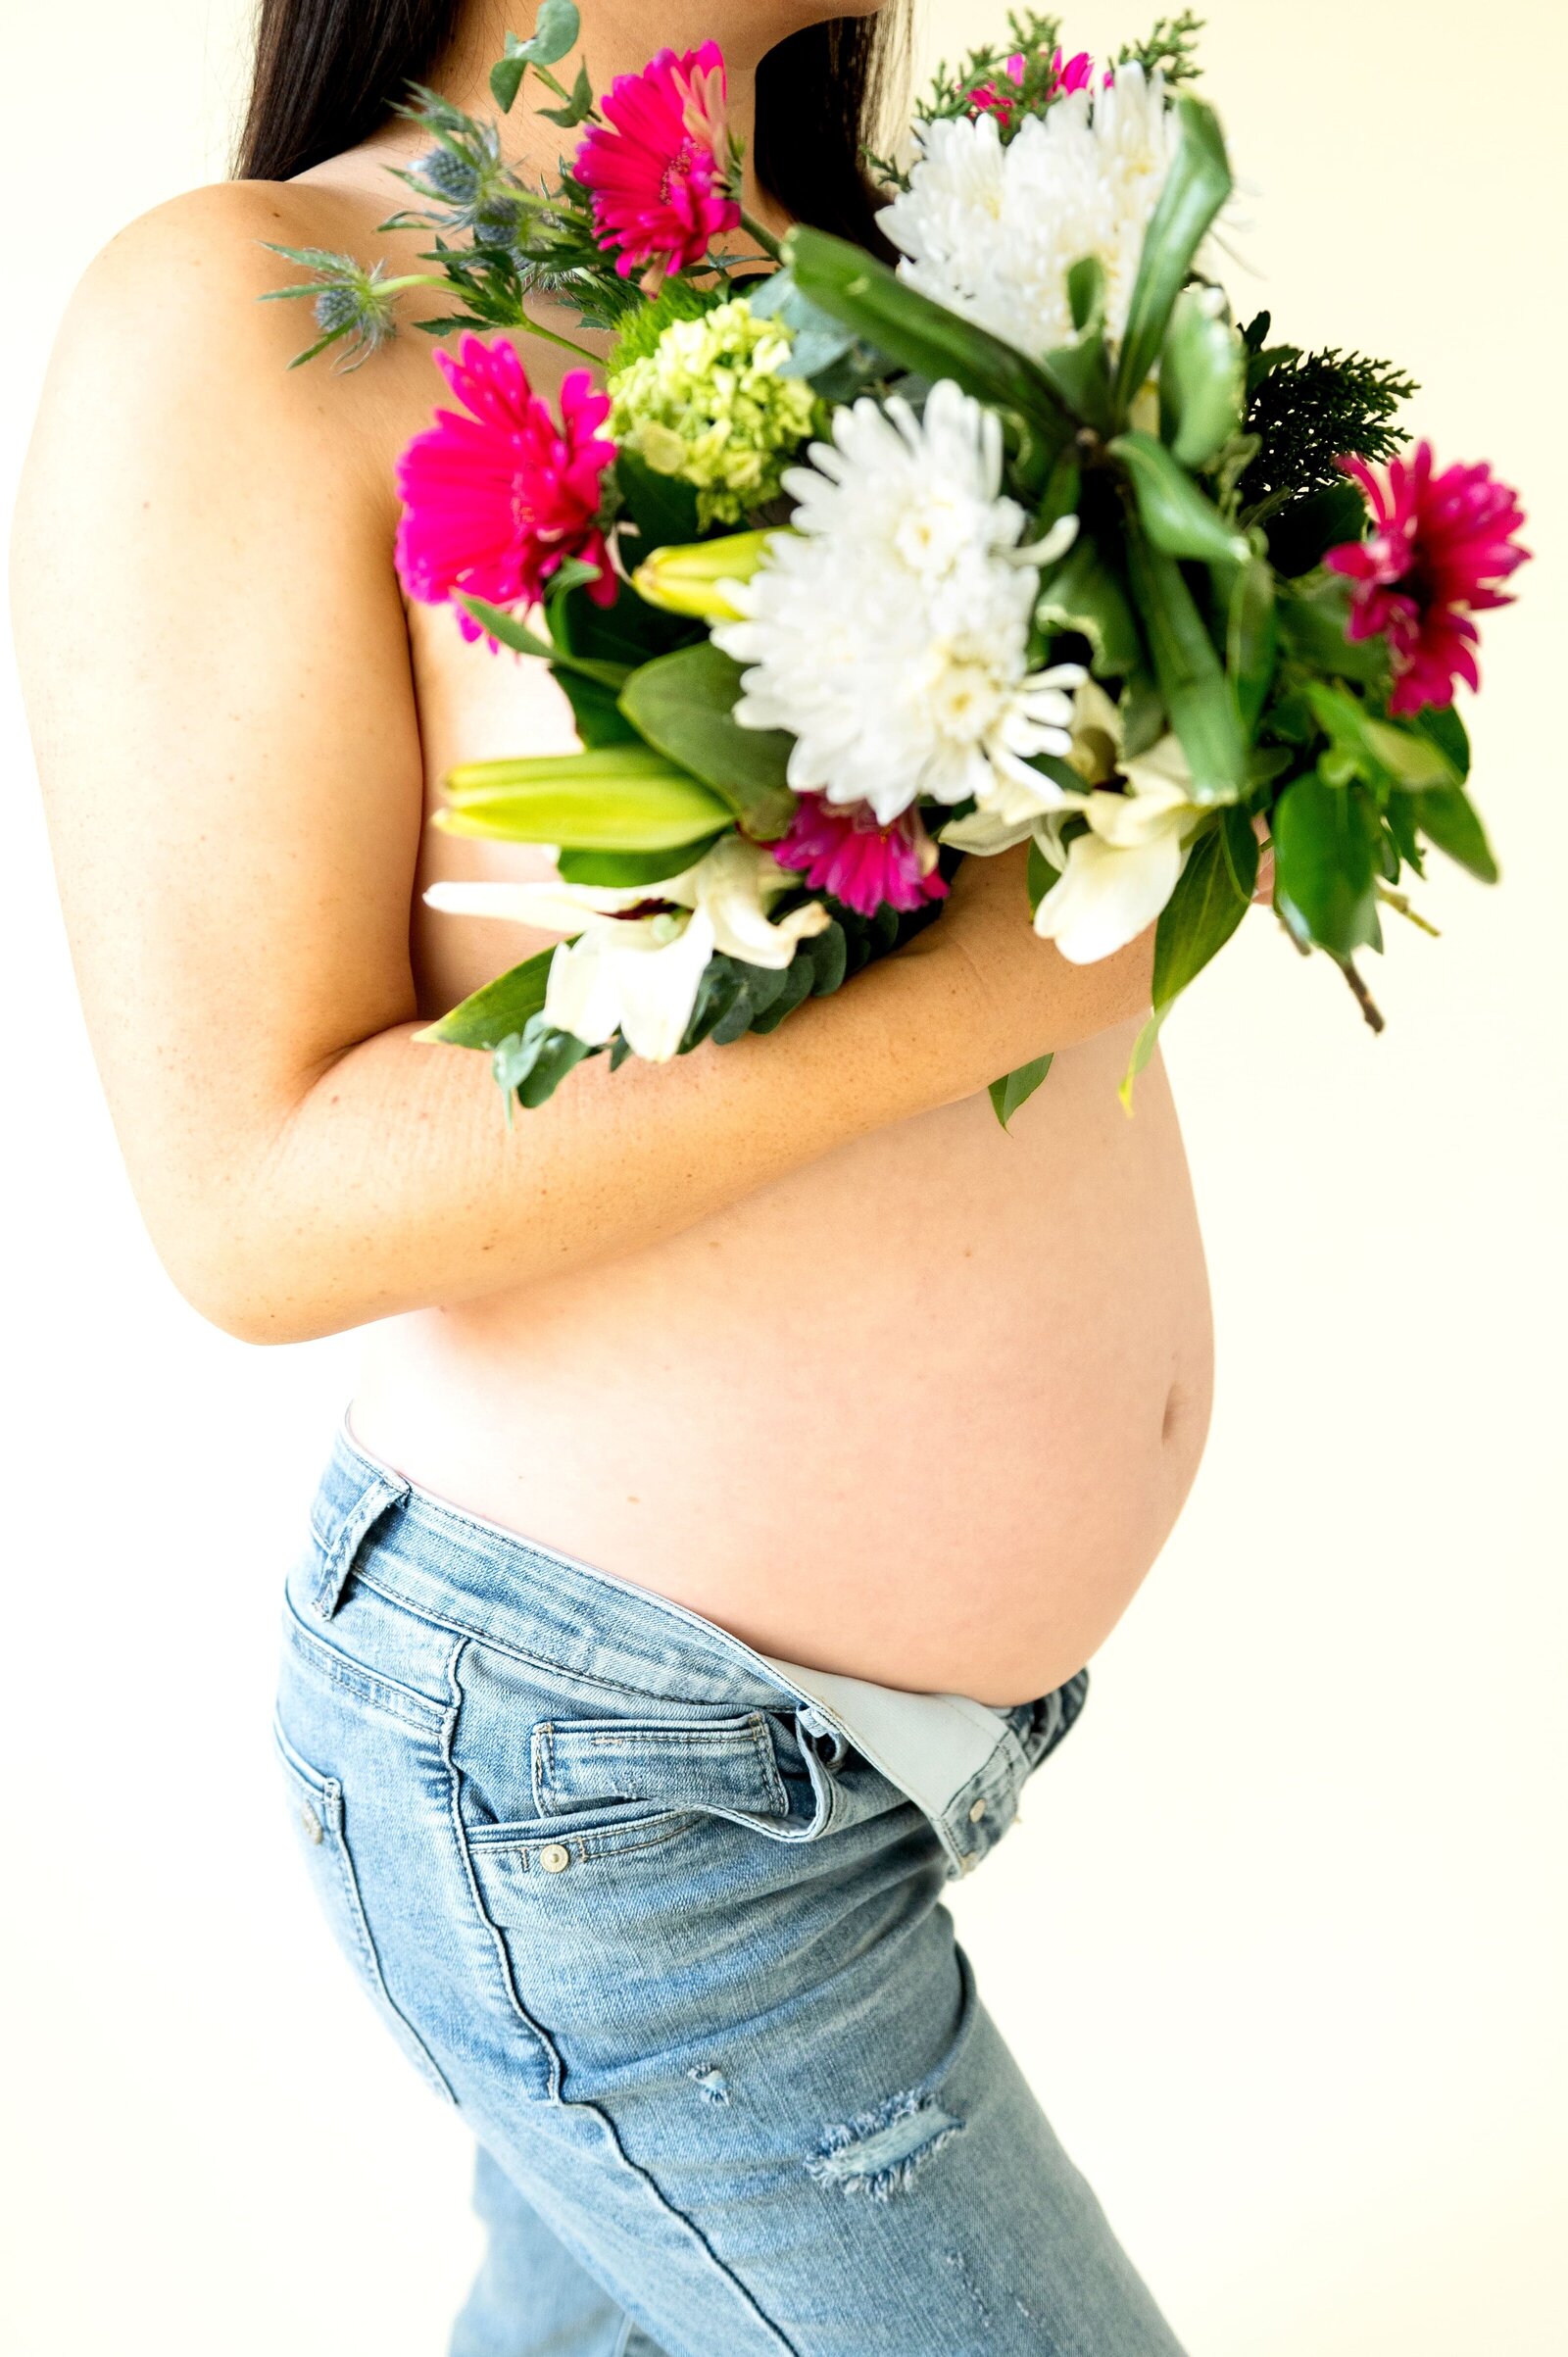 pregnant woman holding flowers to her belly